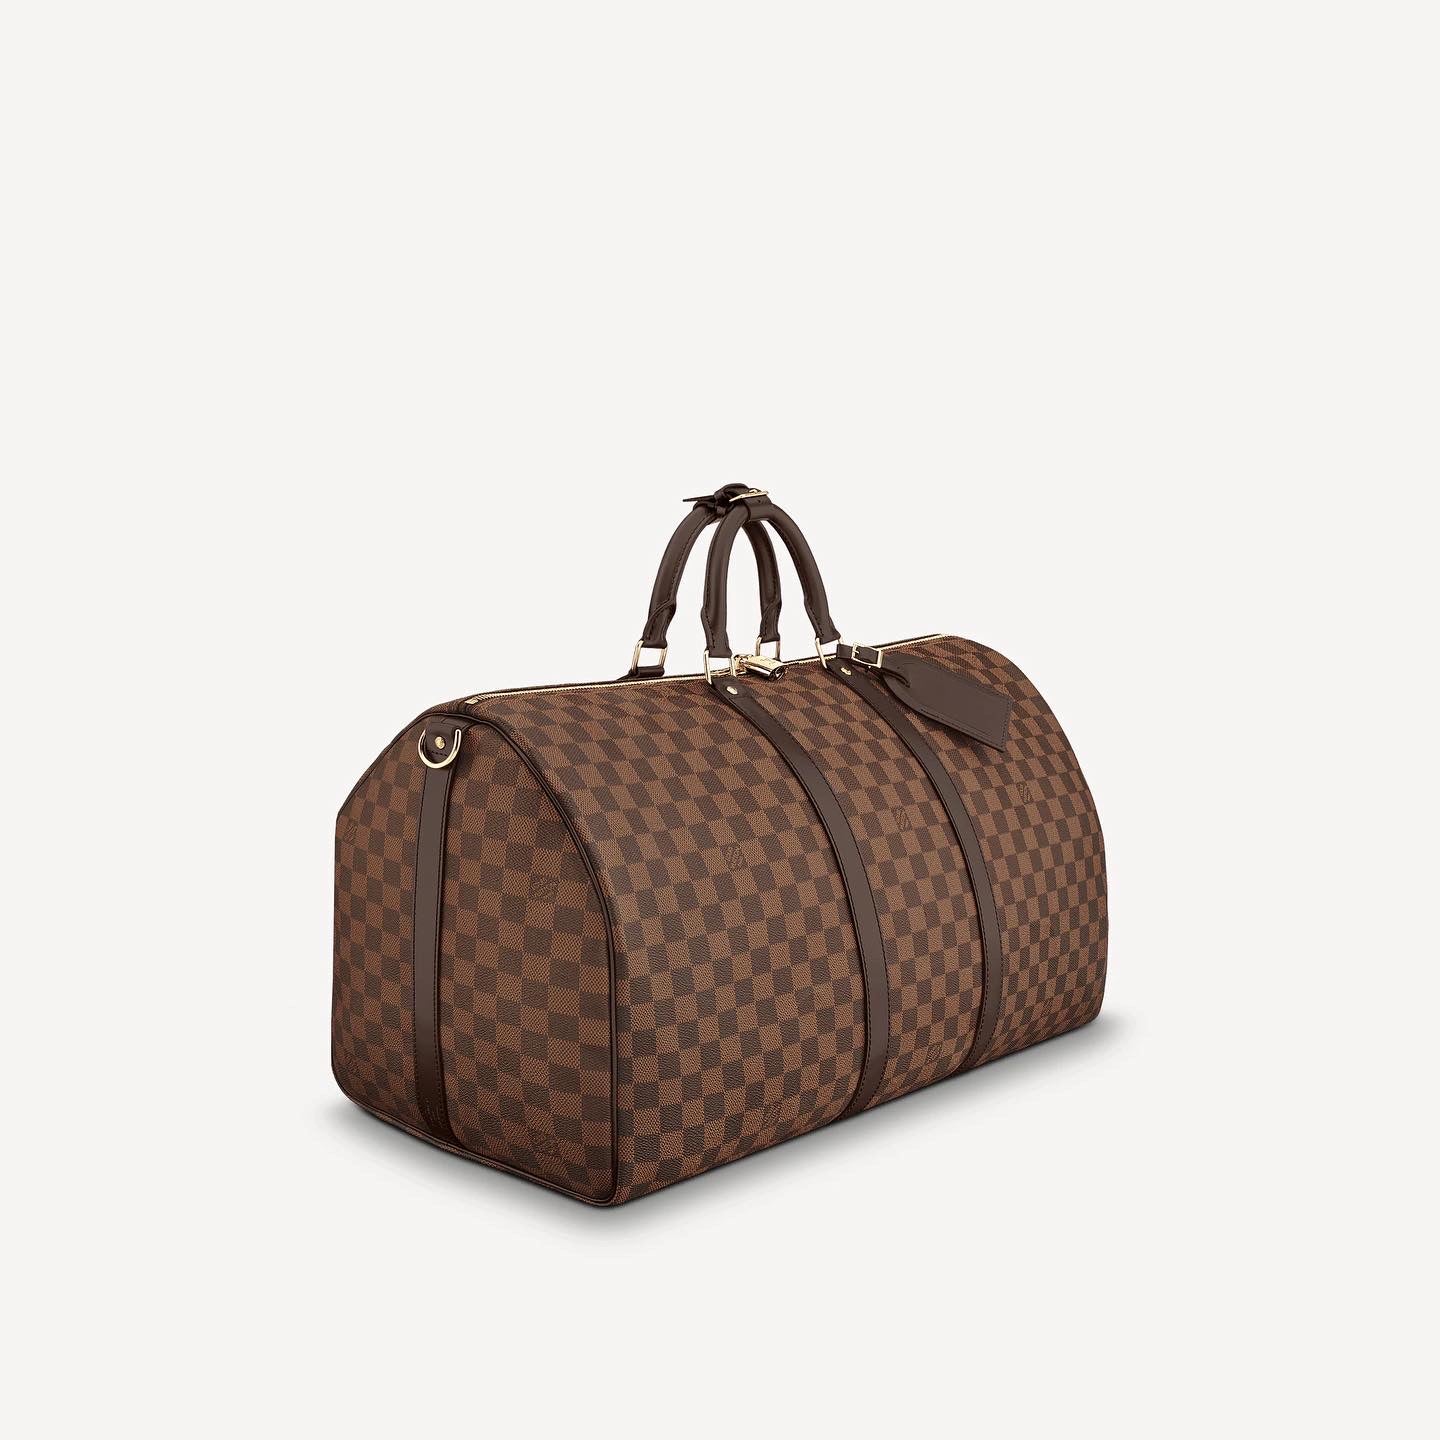 Louis Vuitton KEEPALL BANDOULIÈRE 55 - 100% REAL! for Sale in Germantwn  Hls, IL - OfferUp